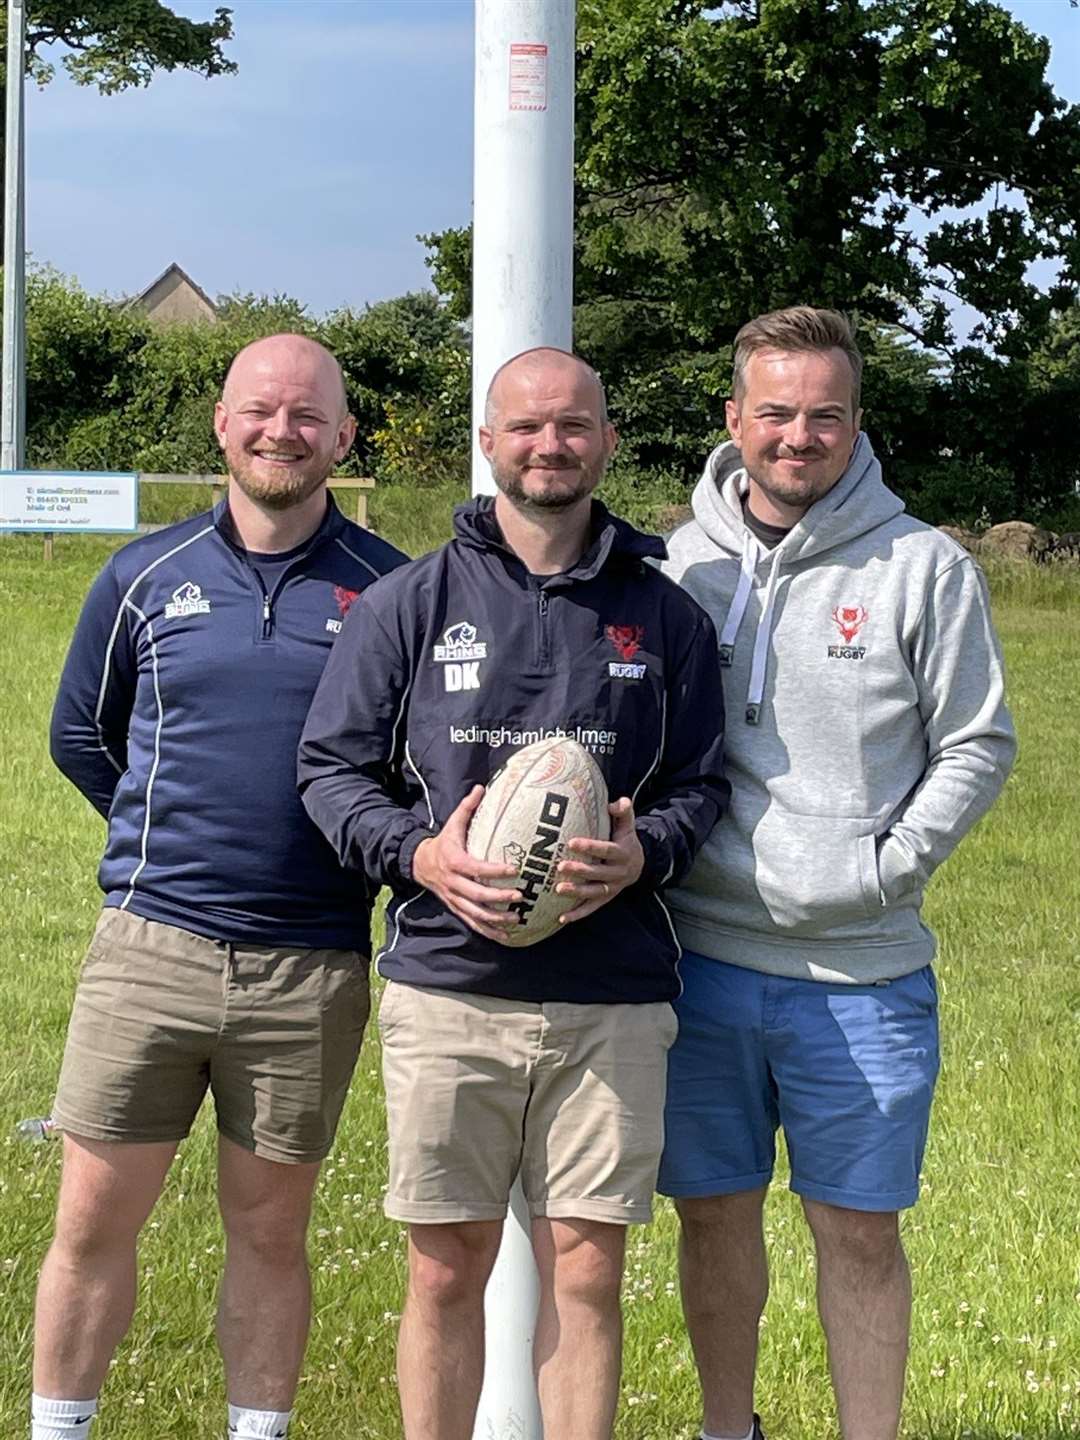 Ross Sutherland Rugby Club have announced that the Kennedy brothers will make up the club's coaching team for the 2023/24 season.